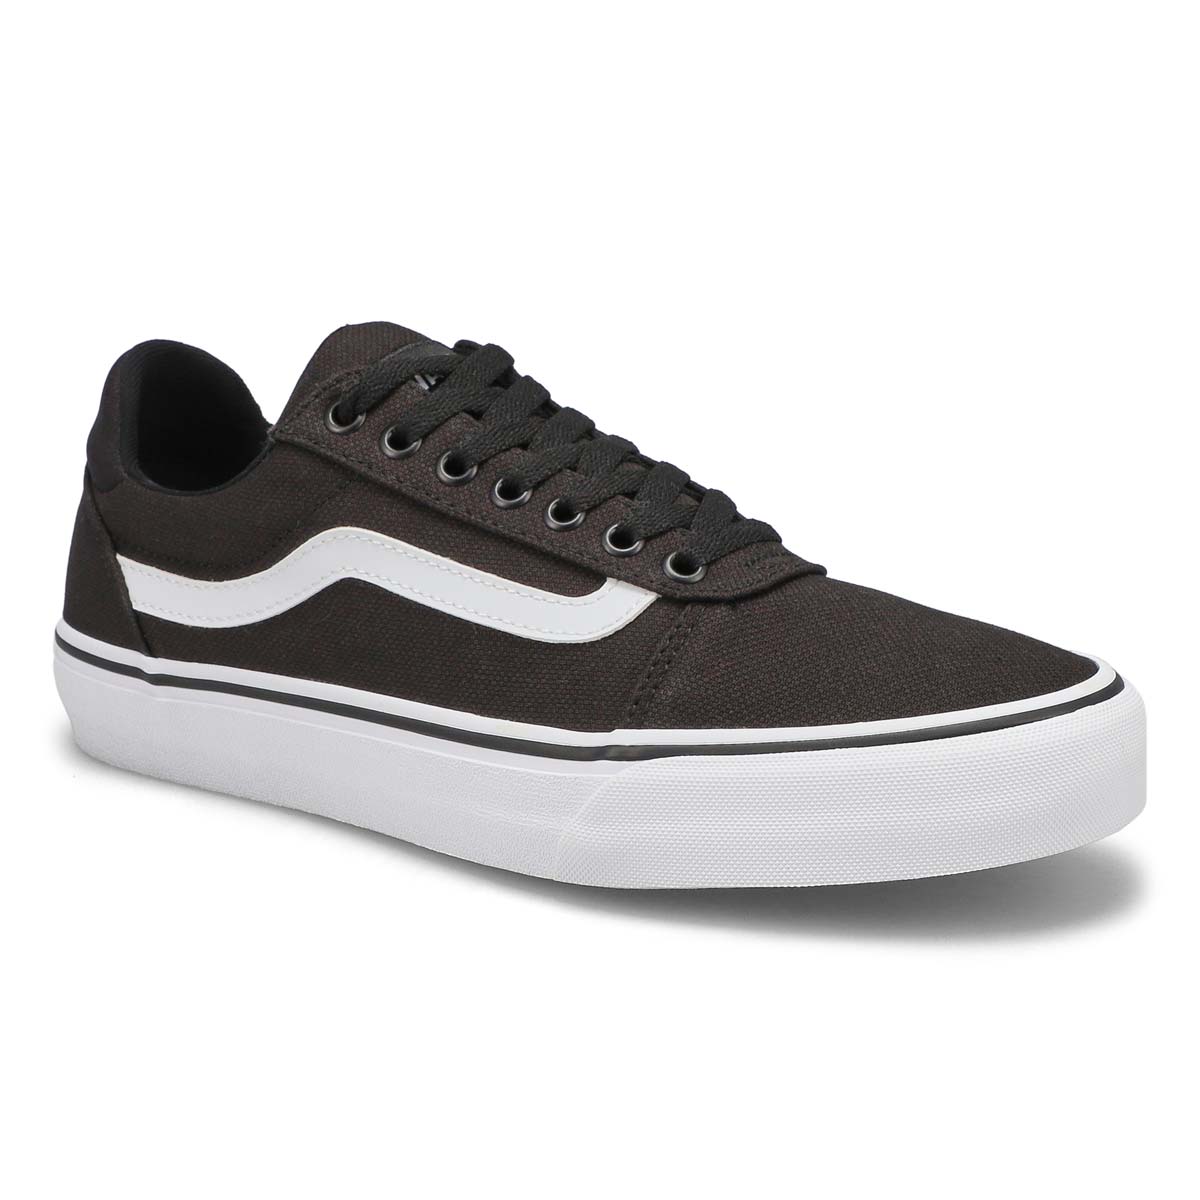 black and white vans with black laces